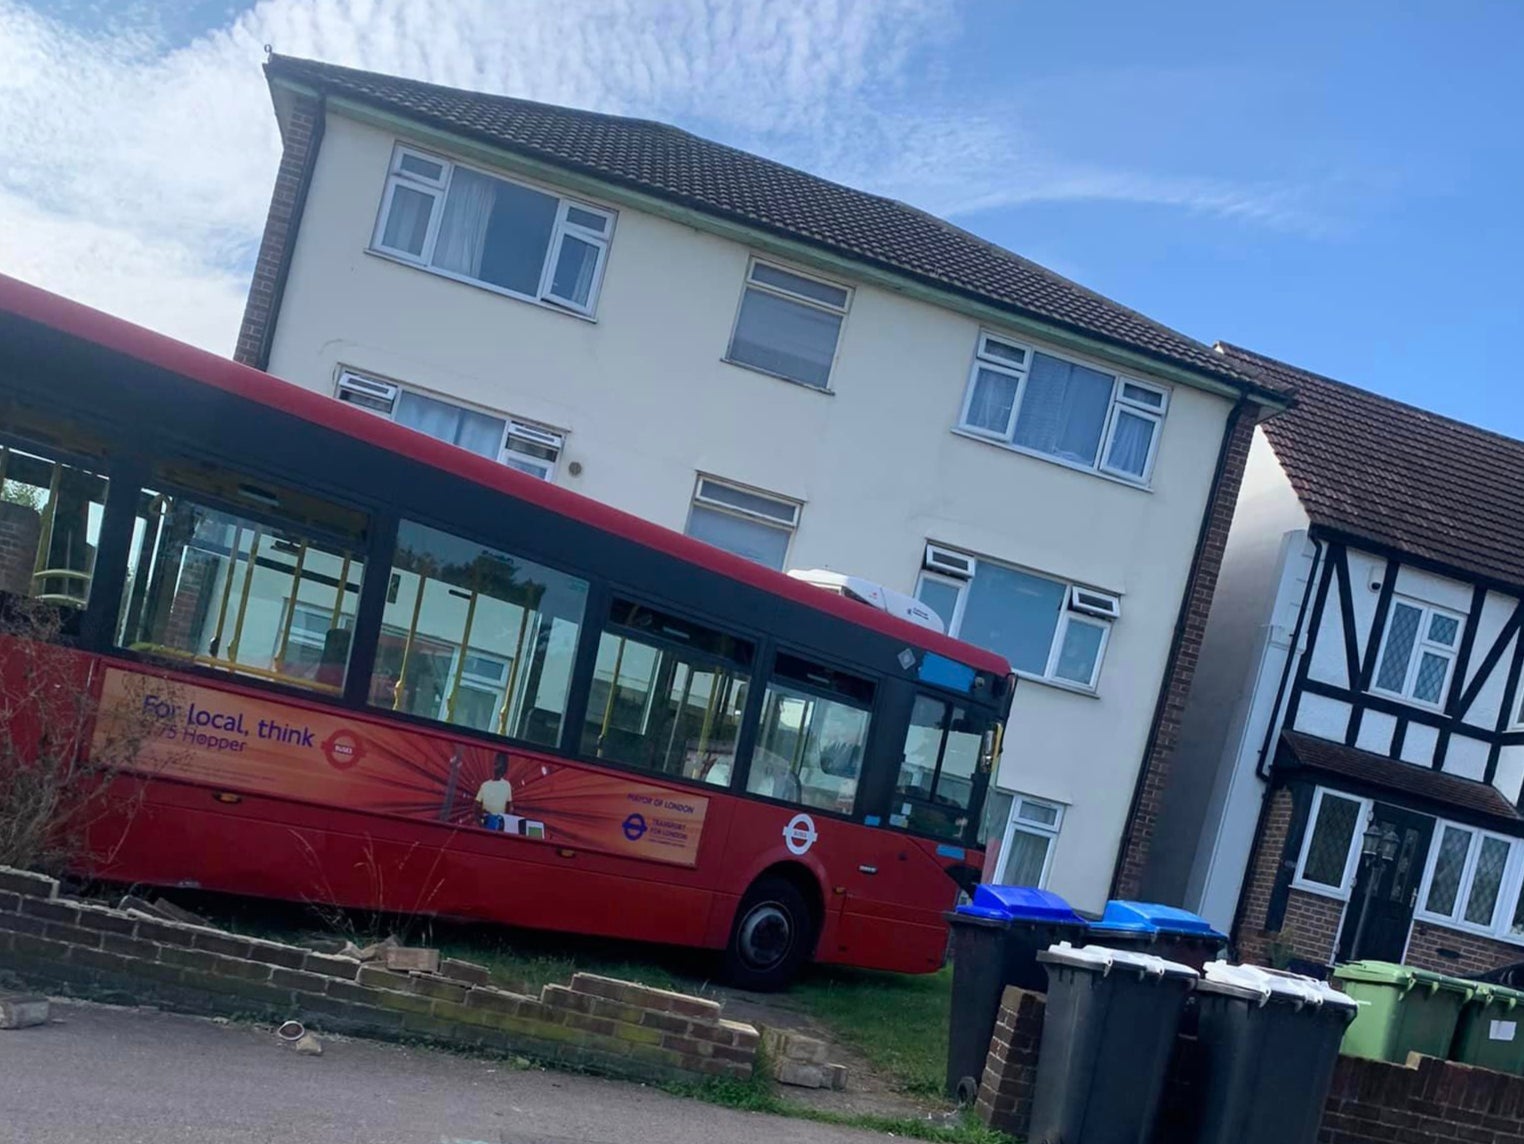 An eyewitness took a picture of the accident in Erith